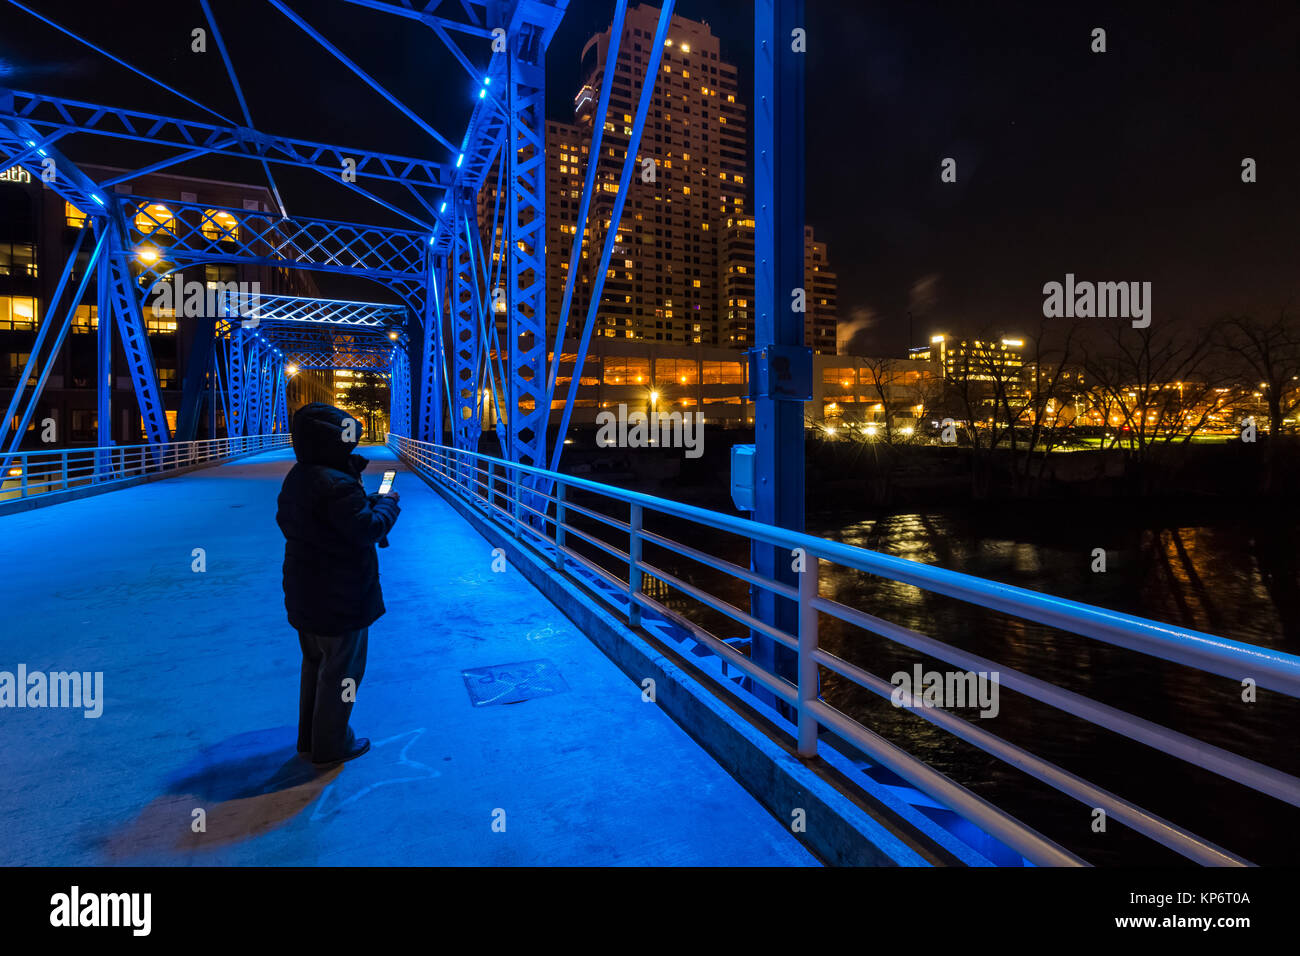 Woman viewing cell phone at night on the Blue Bridge over the Grand River in Grand Rapids, Michigan, USA Stock Photo